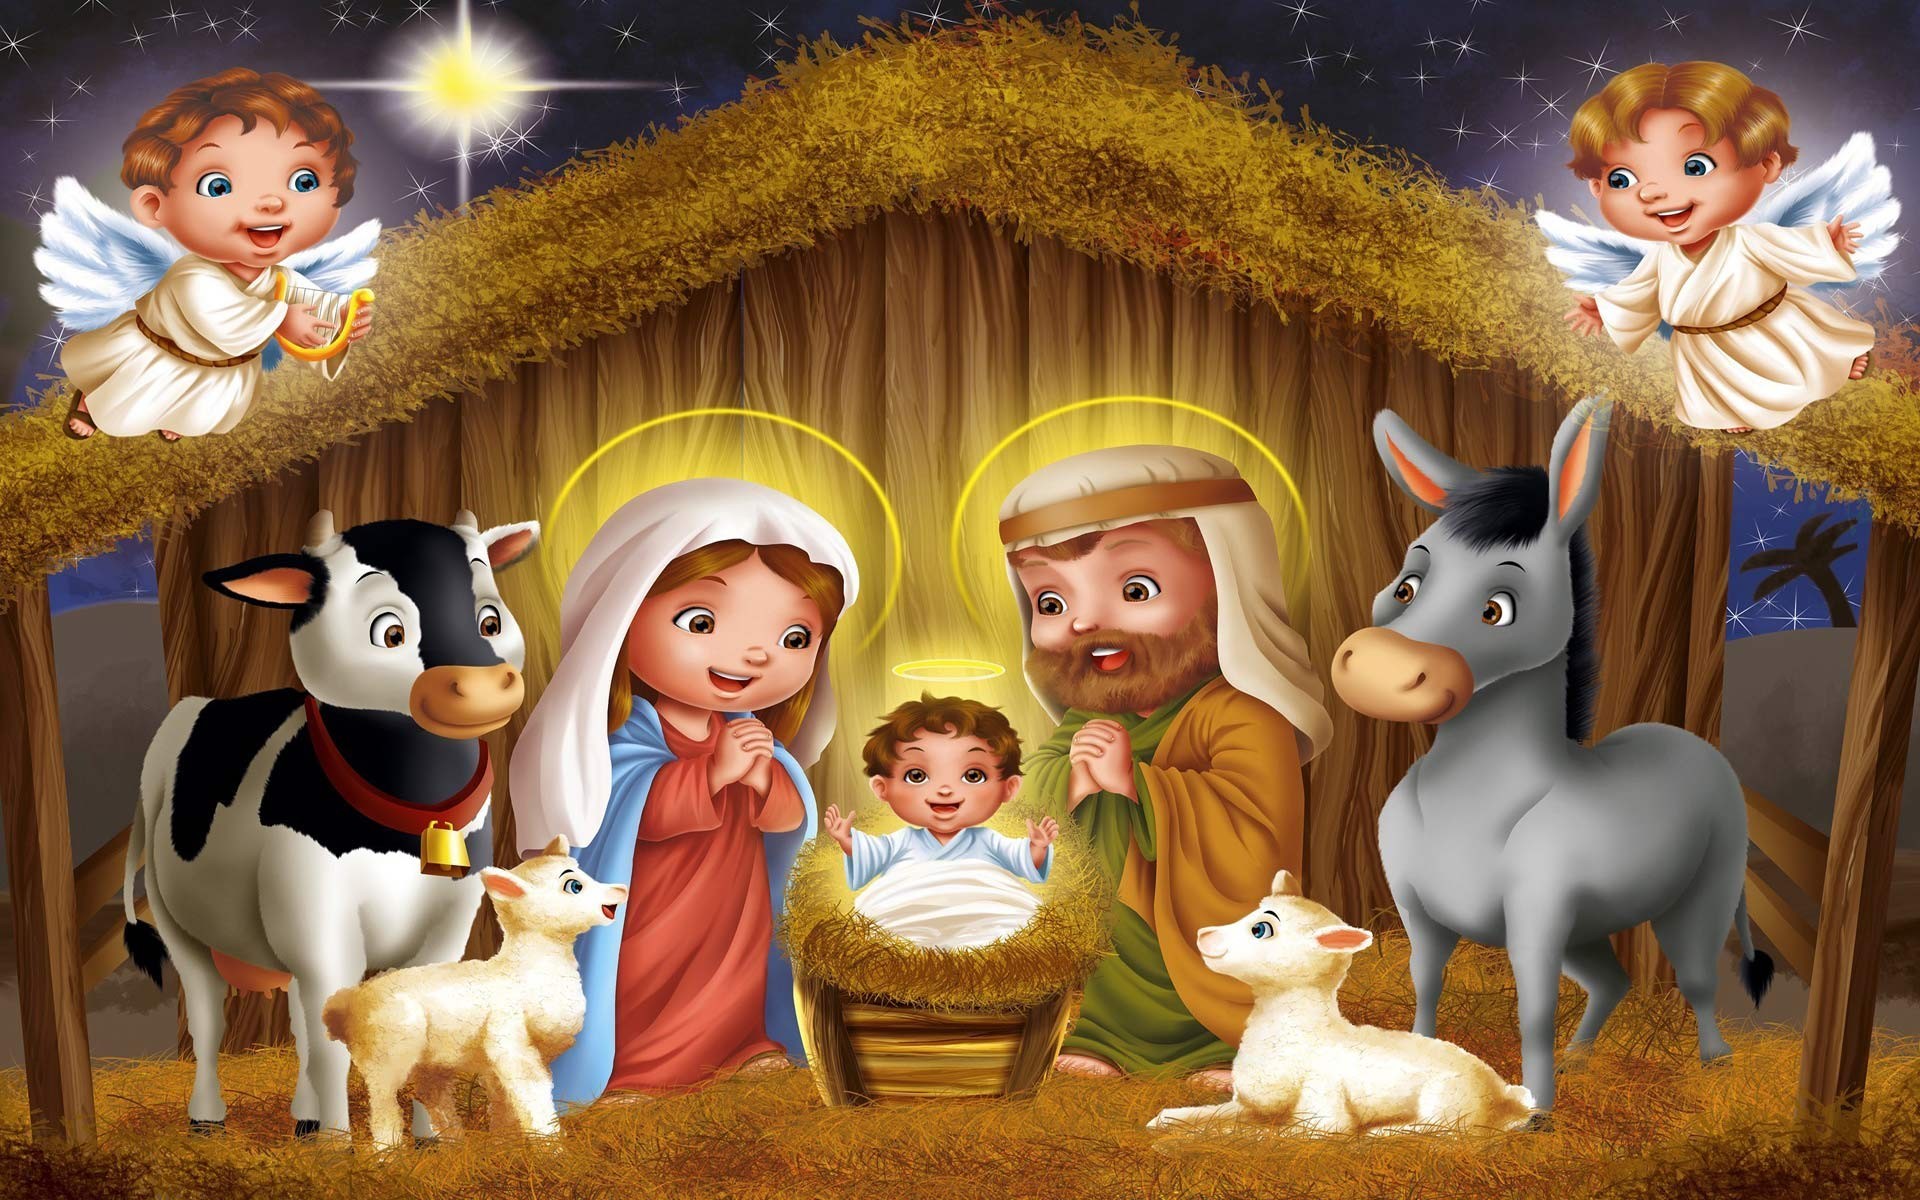 Christmas Nativity Scene wallpaper ·① Download free HD backgrounds ...